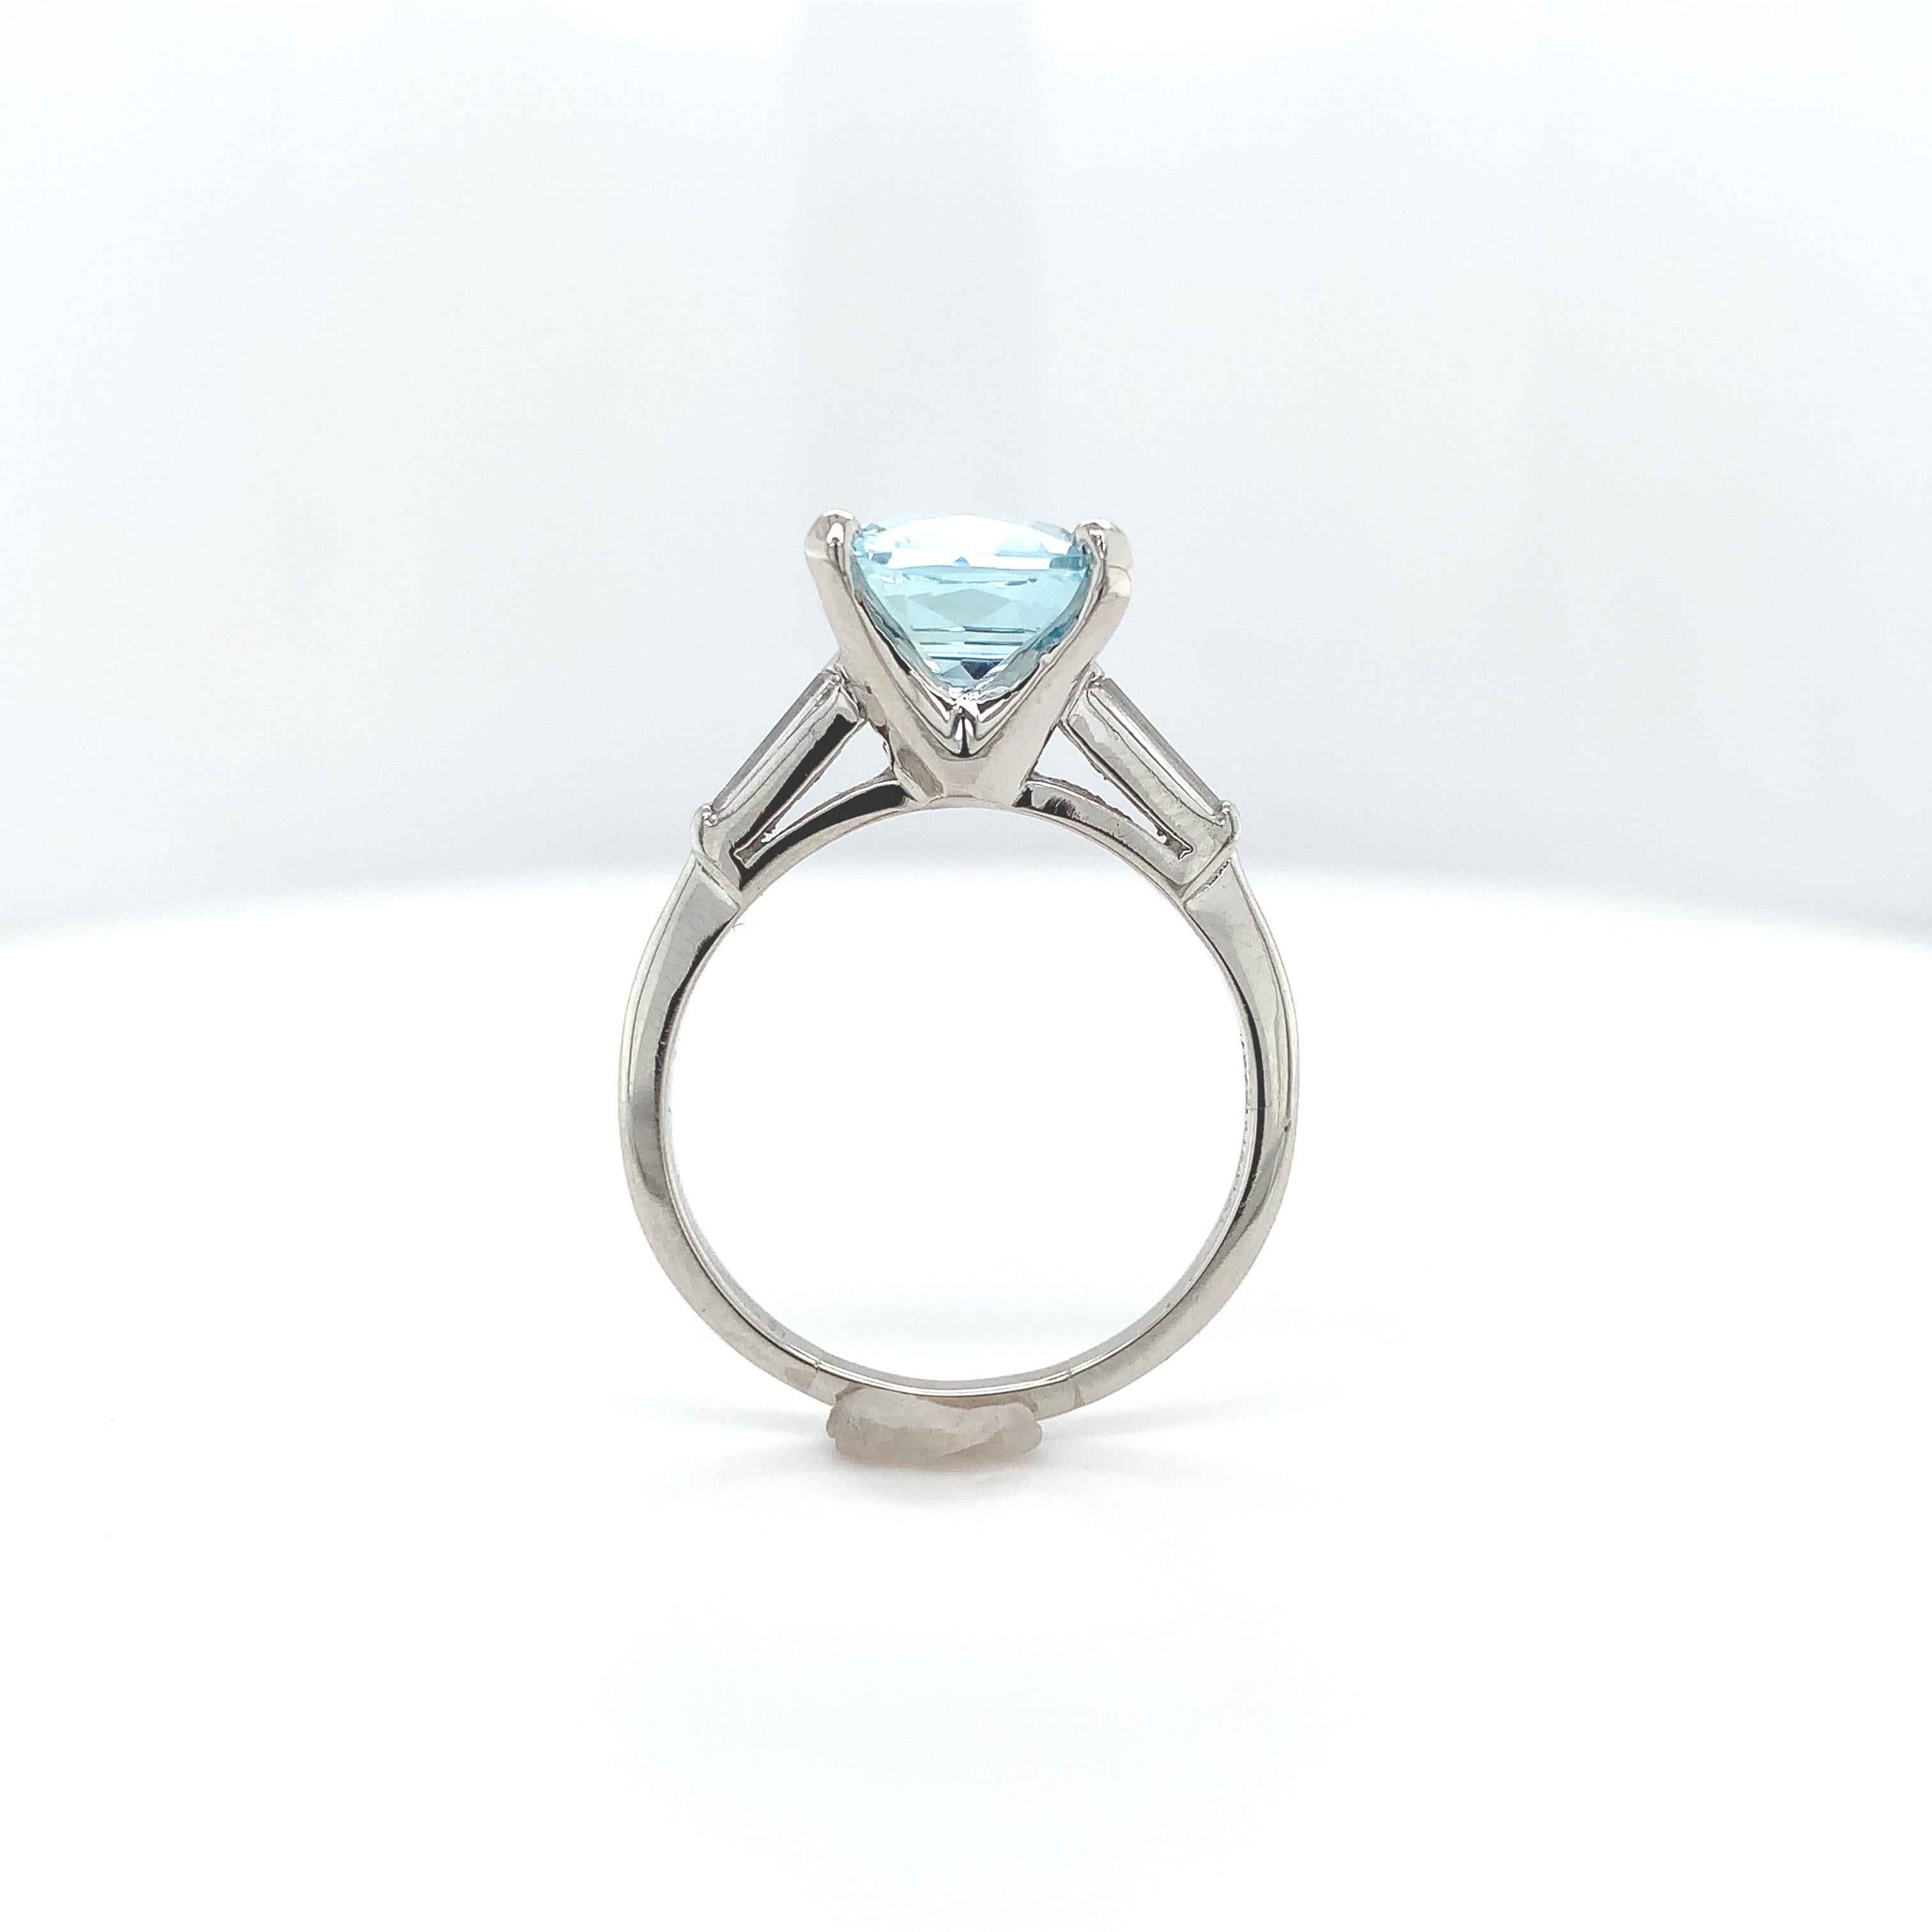 Platinum 2.51 carat aquamarine and diamond ring. The light blue aquamarine is a beautiful specialty antique cushion cut measuring about 9mm. There are 2 long diamond baguette accents measuring about 5mm x 1.5mm. The ring fits a size 7.25 finger and